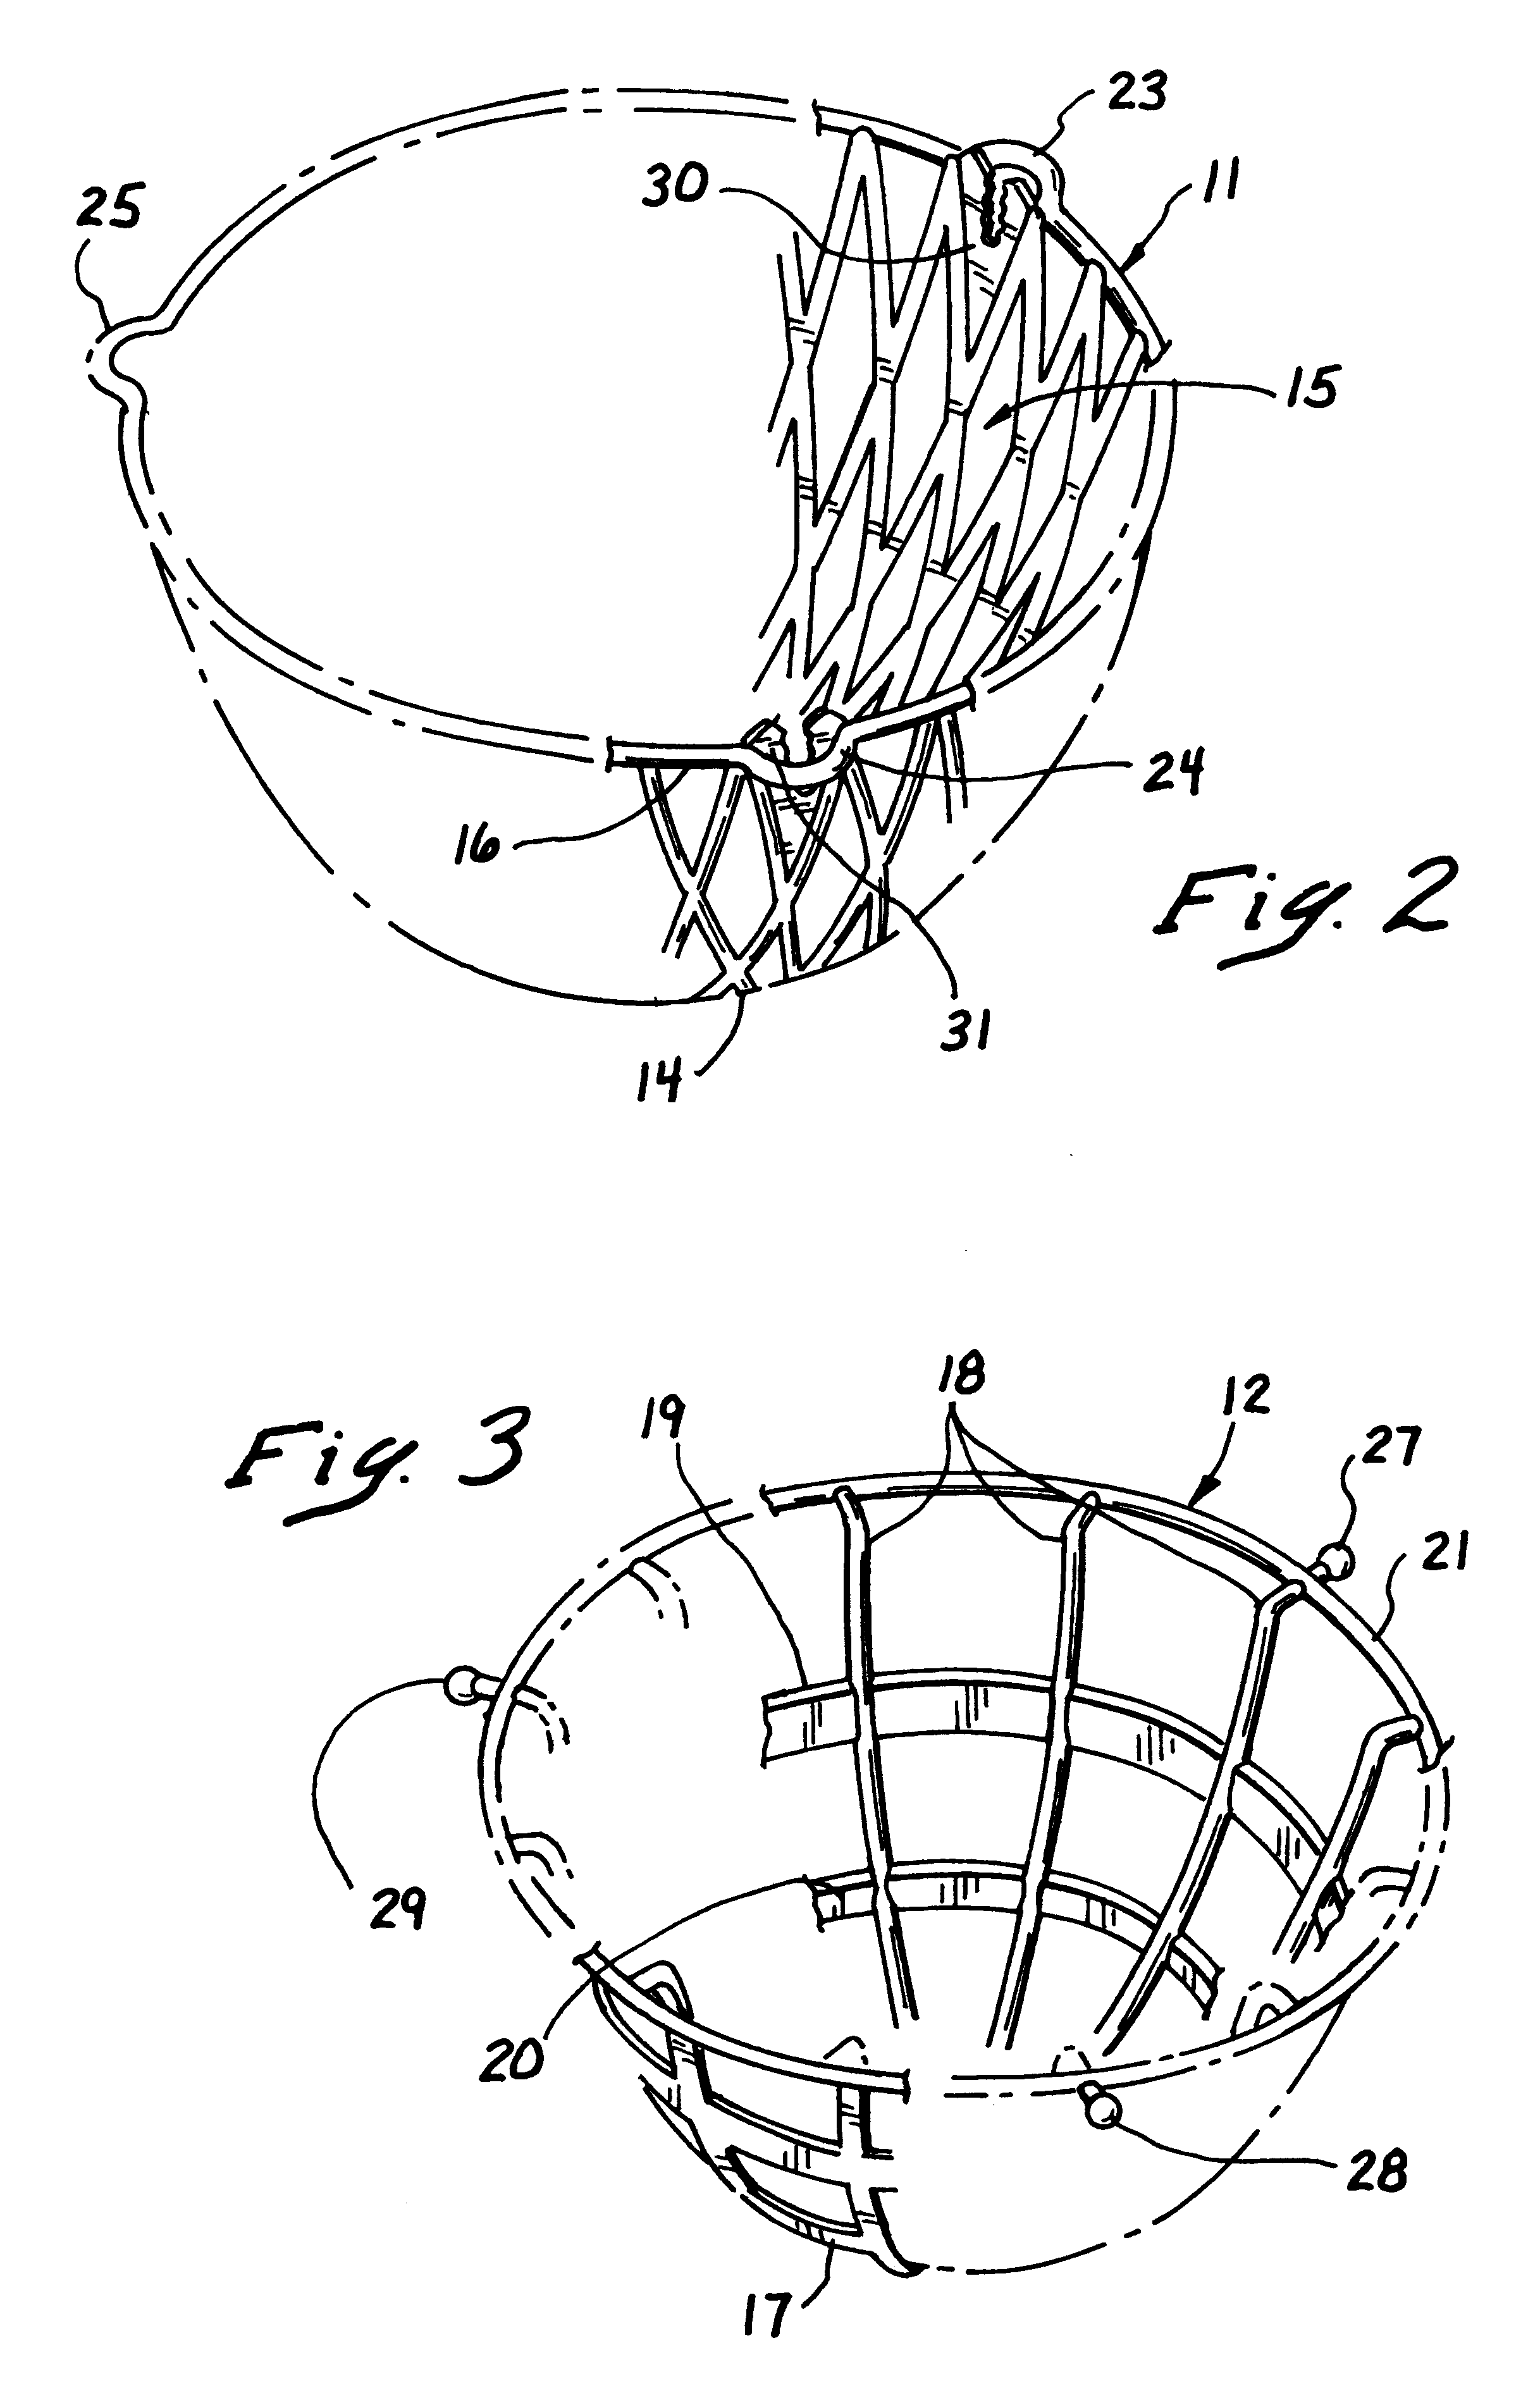 Protective bra cage device for laundering delicate undergarments